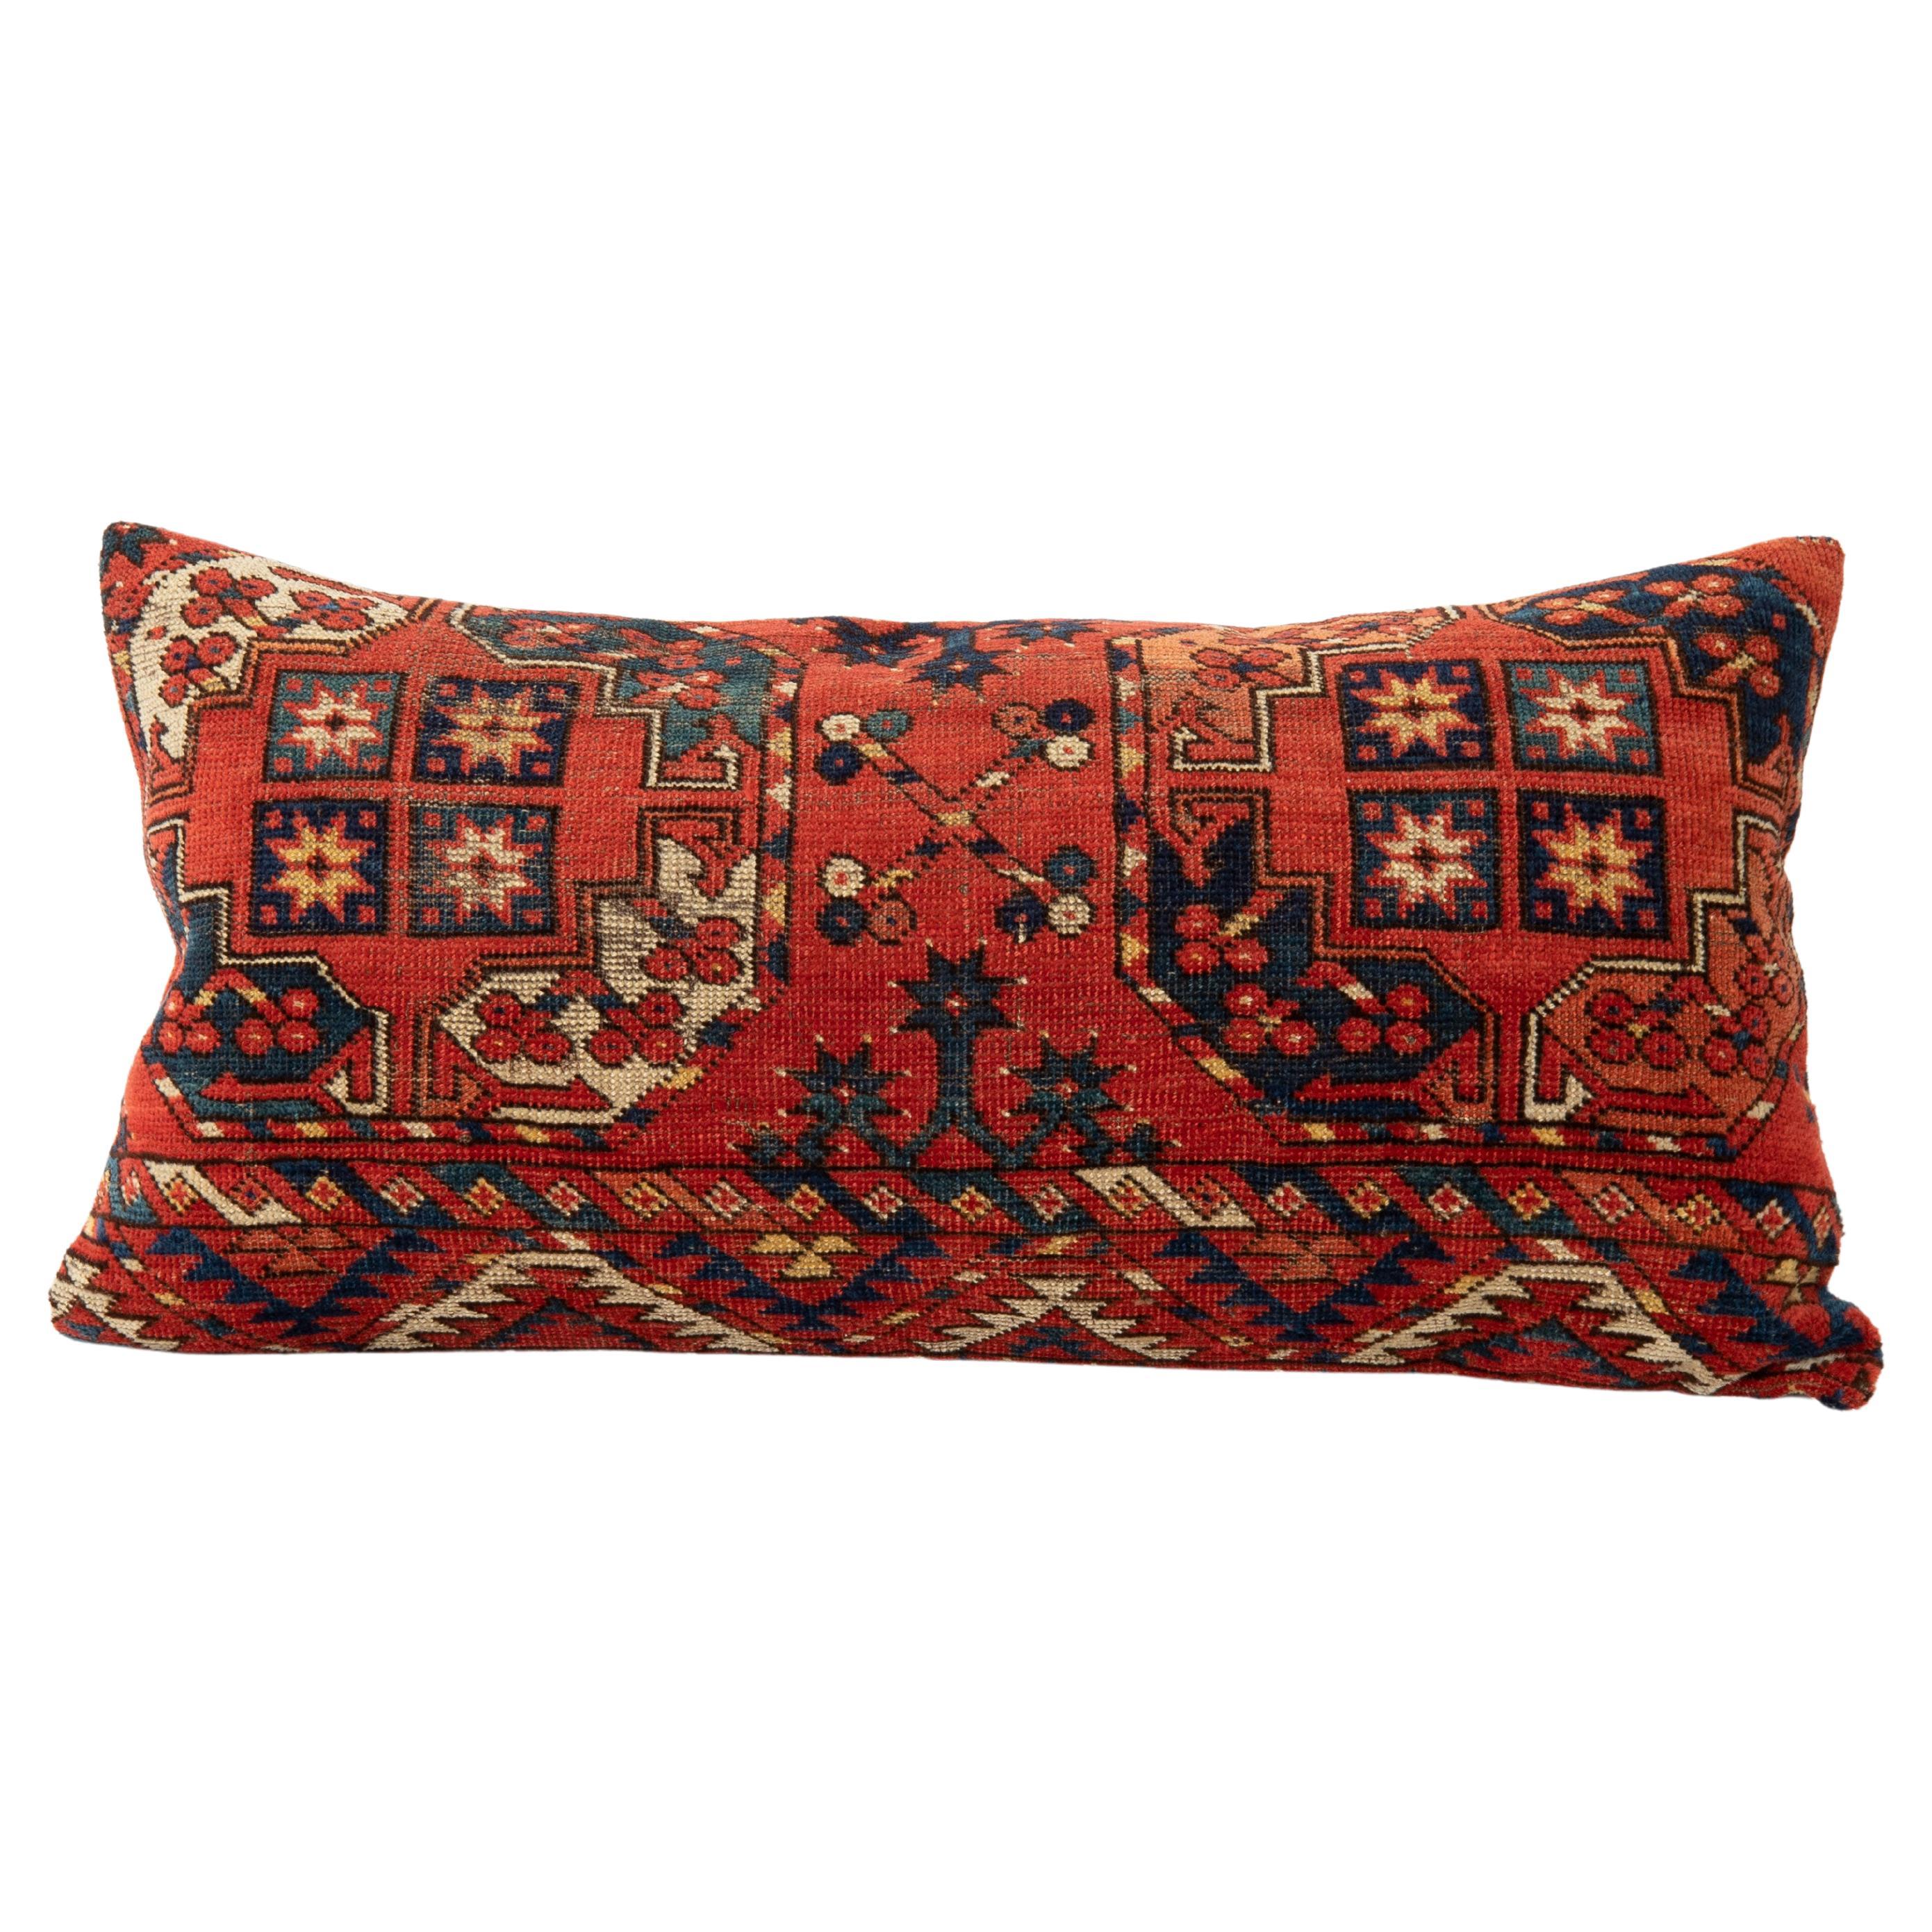 Antique Rug Pillowcase Made from a Mid-19th C. Turkmen Ersari Rug Fragment For Sale